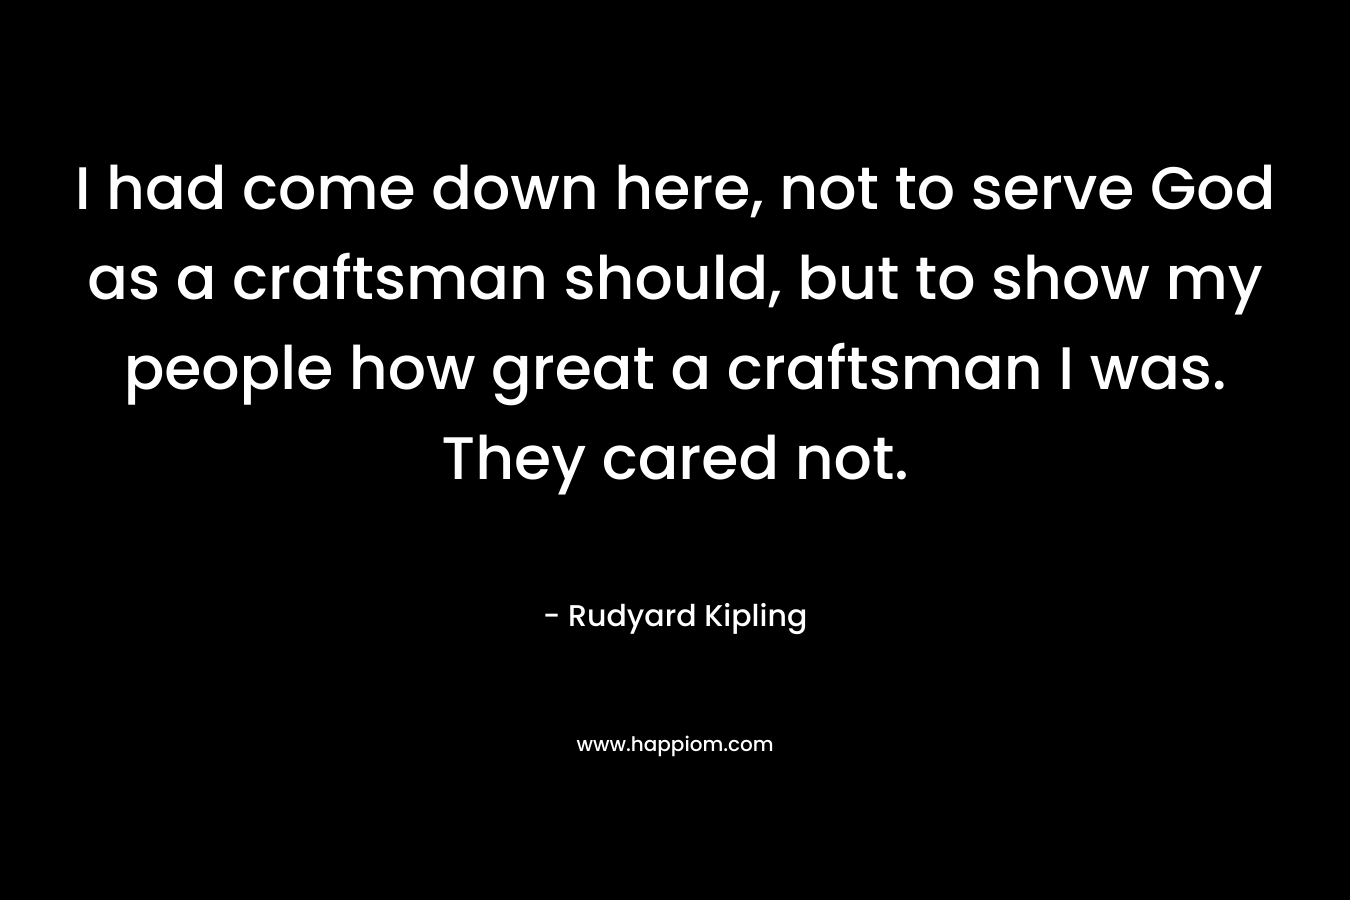 I had come down here, not to serve God as a craftsman should, but to show my people how great a craftsman I was. They cared not. – Rudyard Kipling